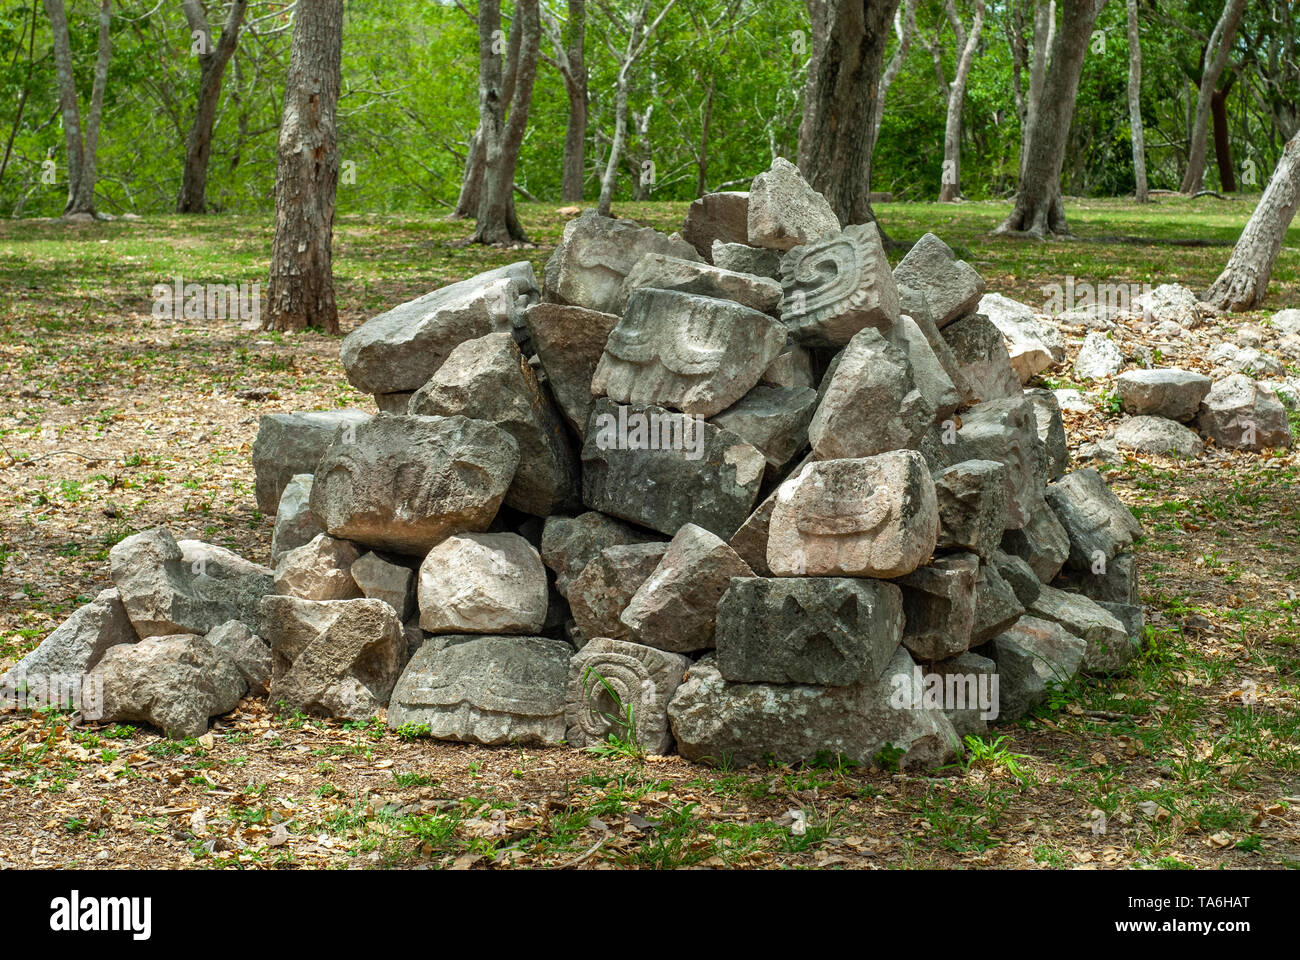 Remains of the Mayan ruins of the archaeological area of Uxmal, in the Mexican Yucatan peninsula Stock Photo